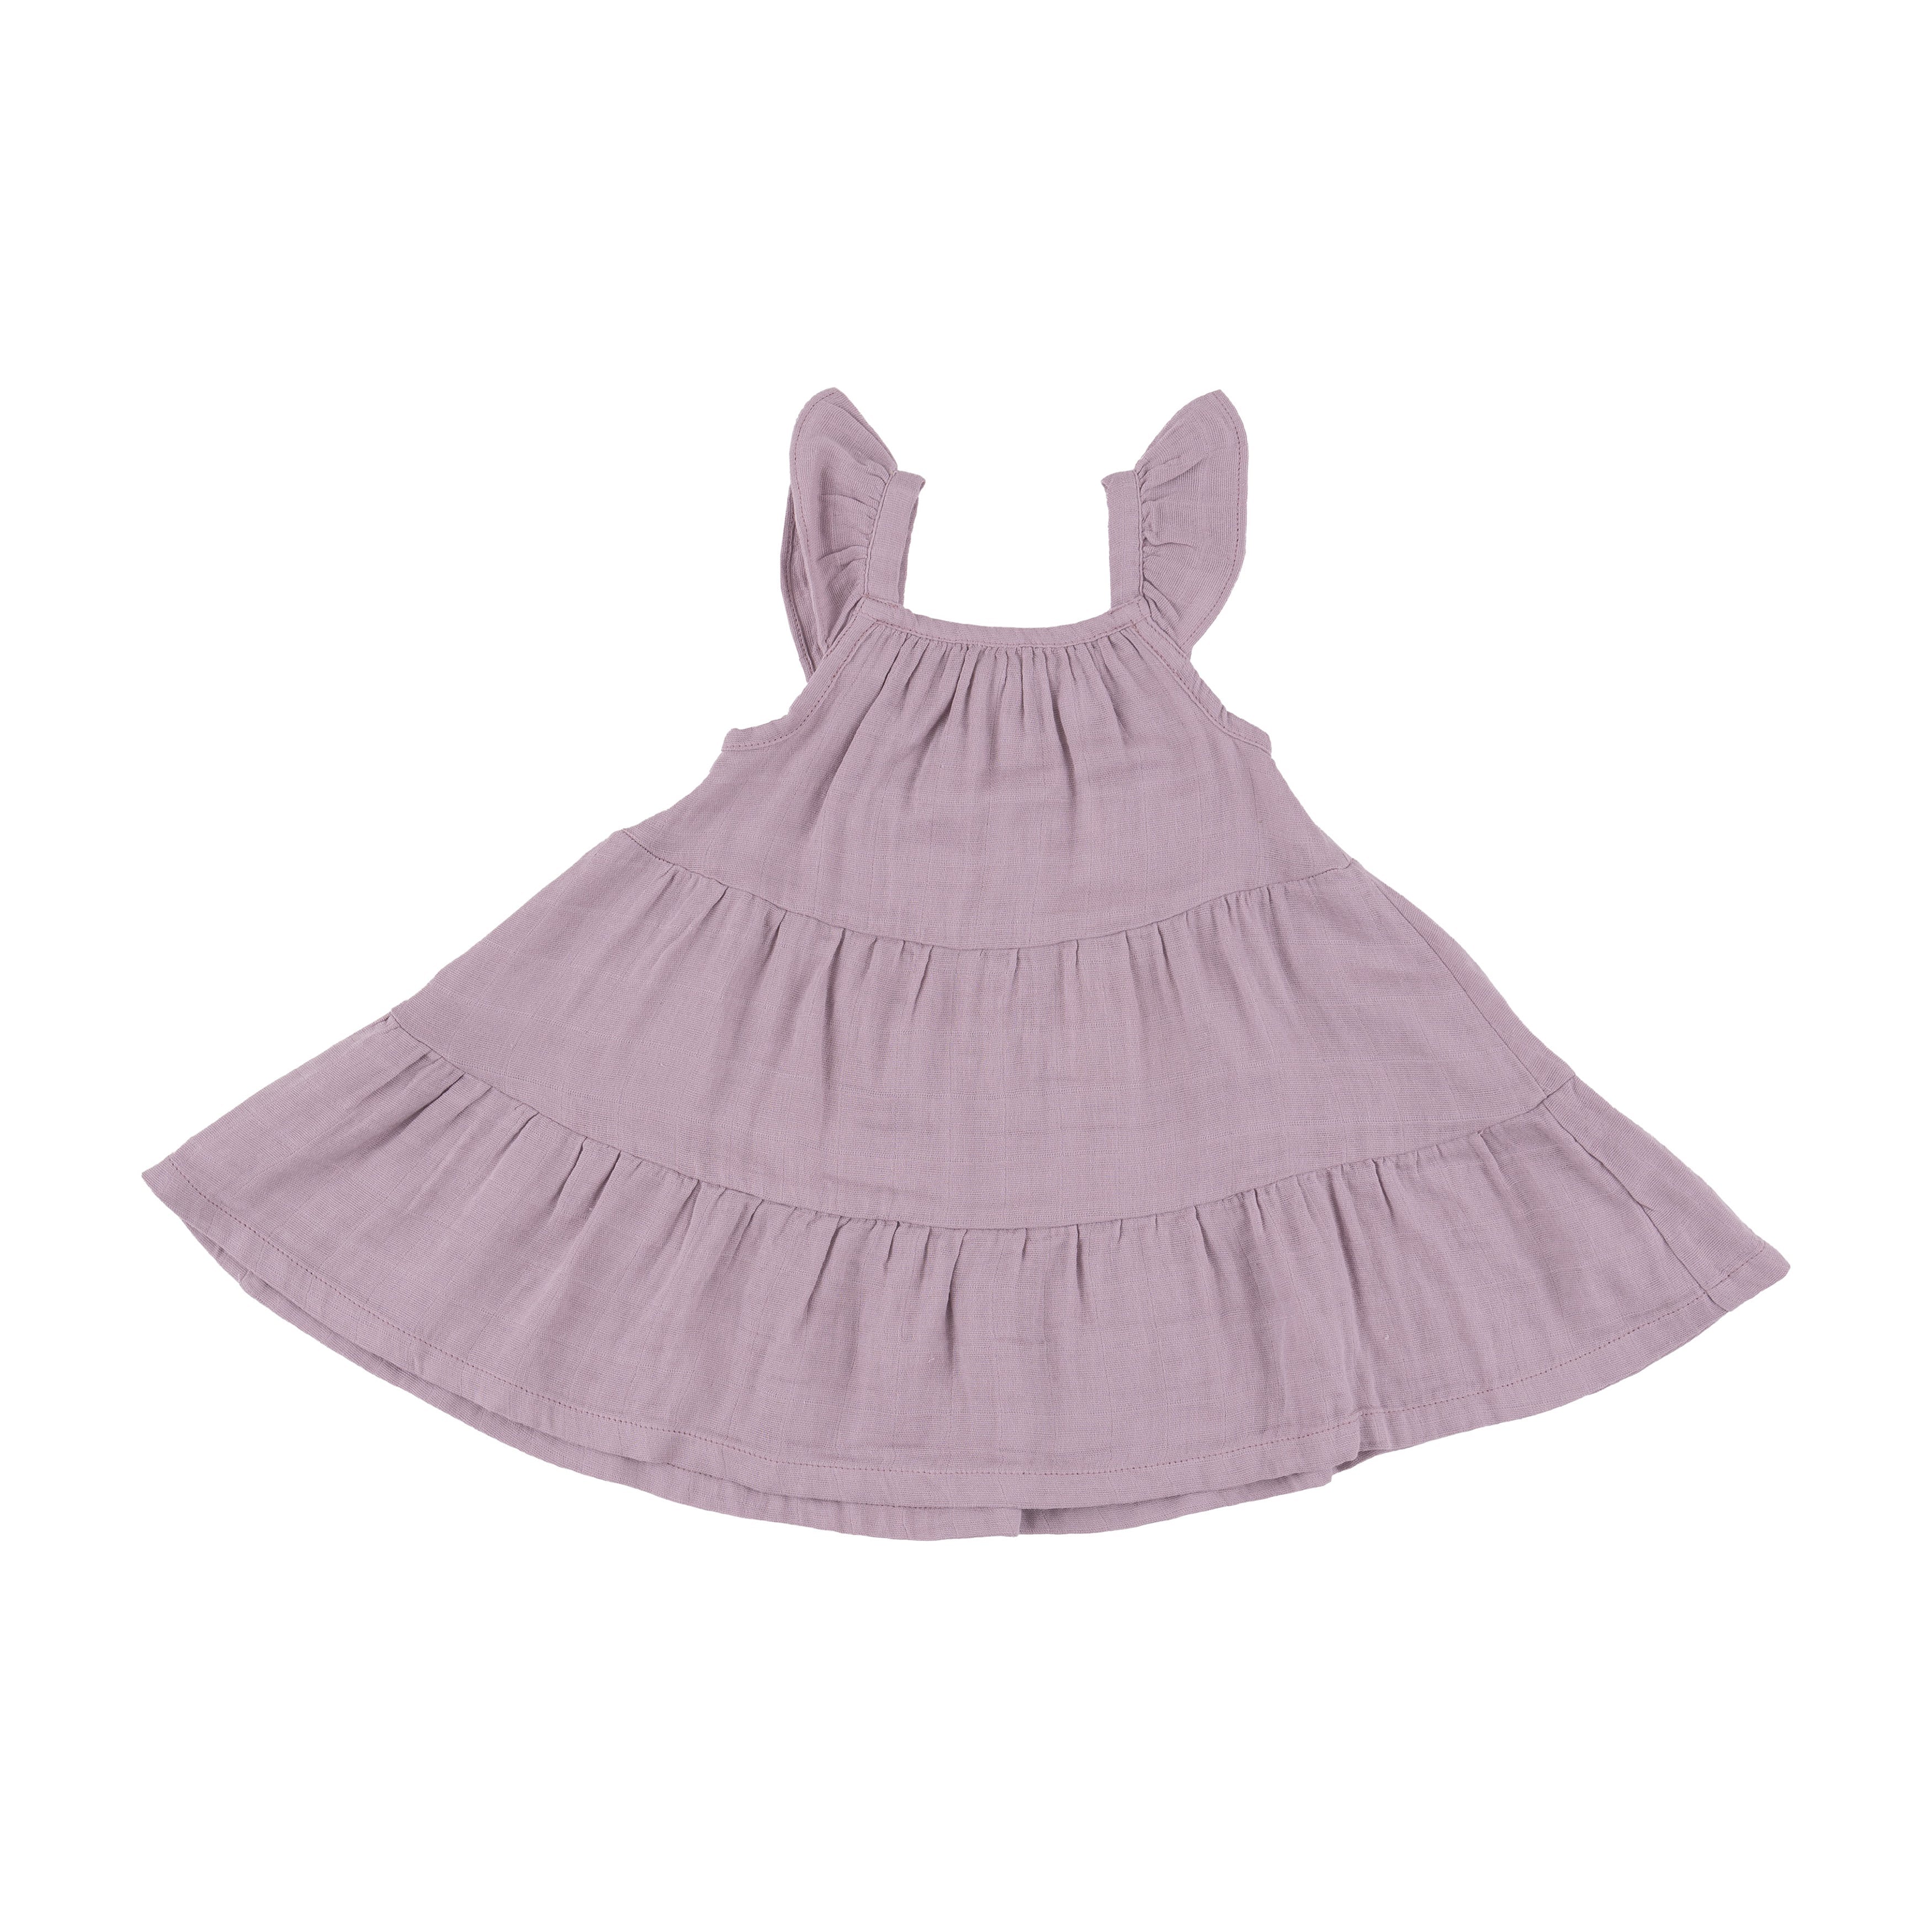 Twirly Sundress & Diaper Cover - Dusty Lavender Solid Muslin